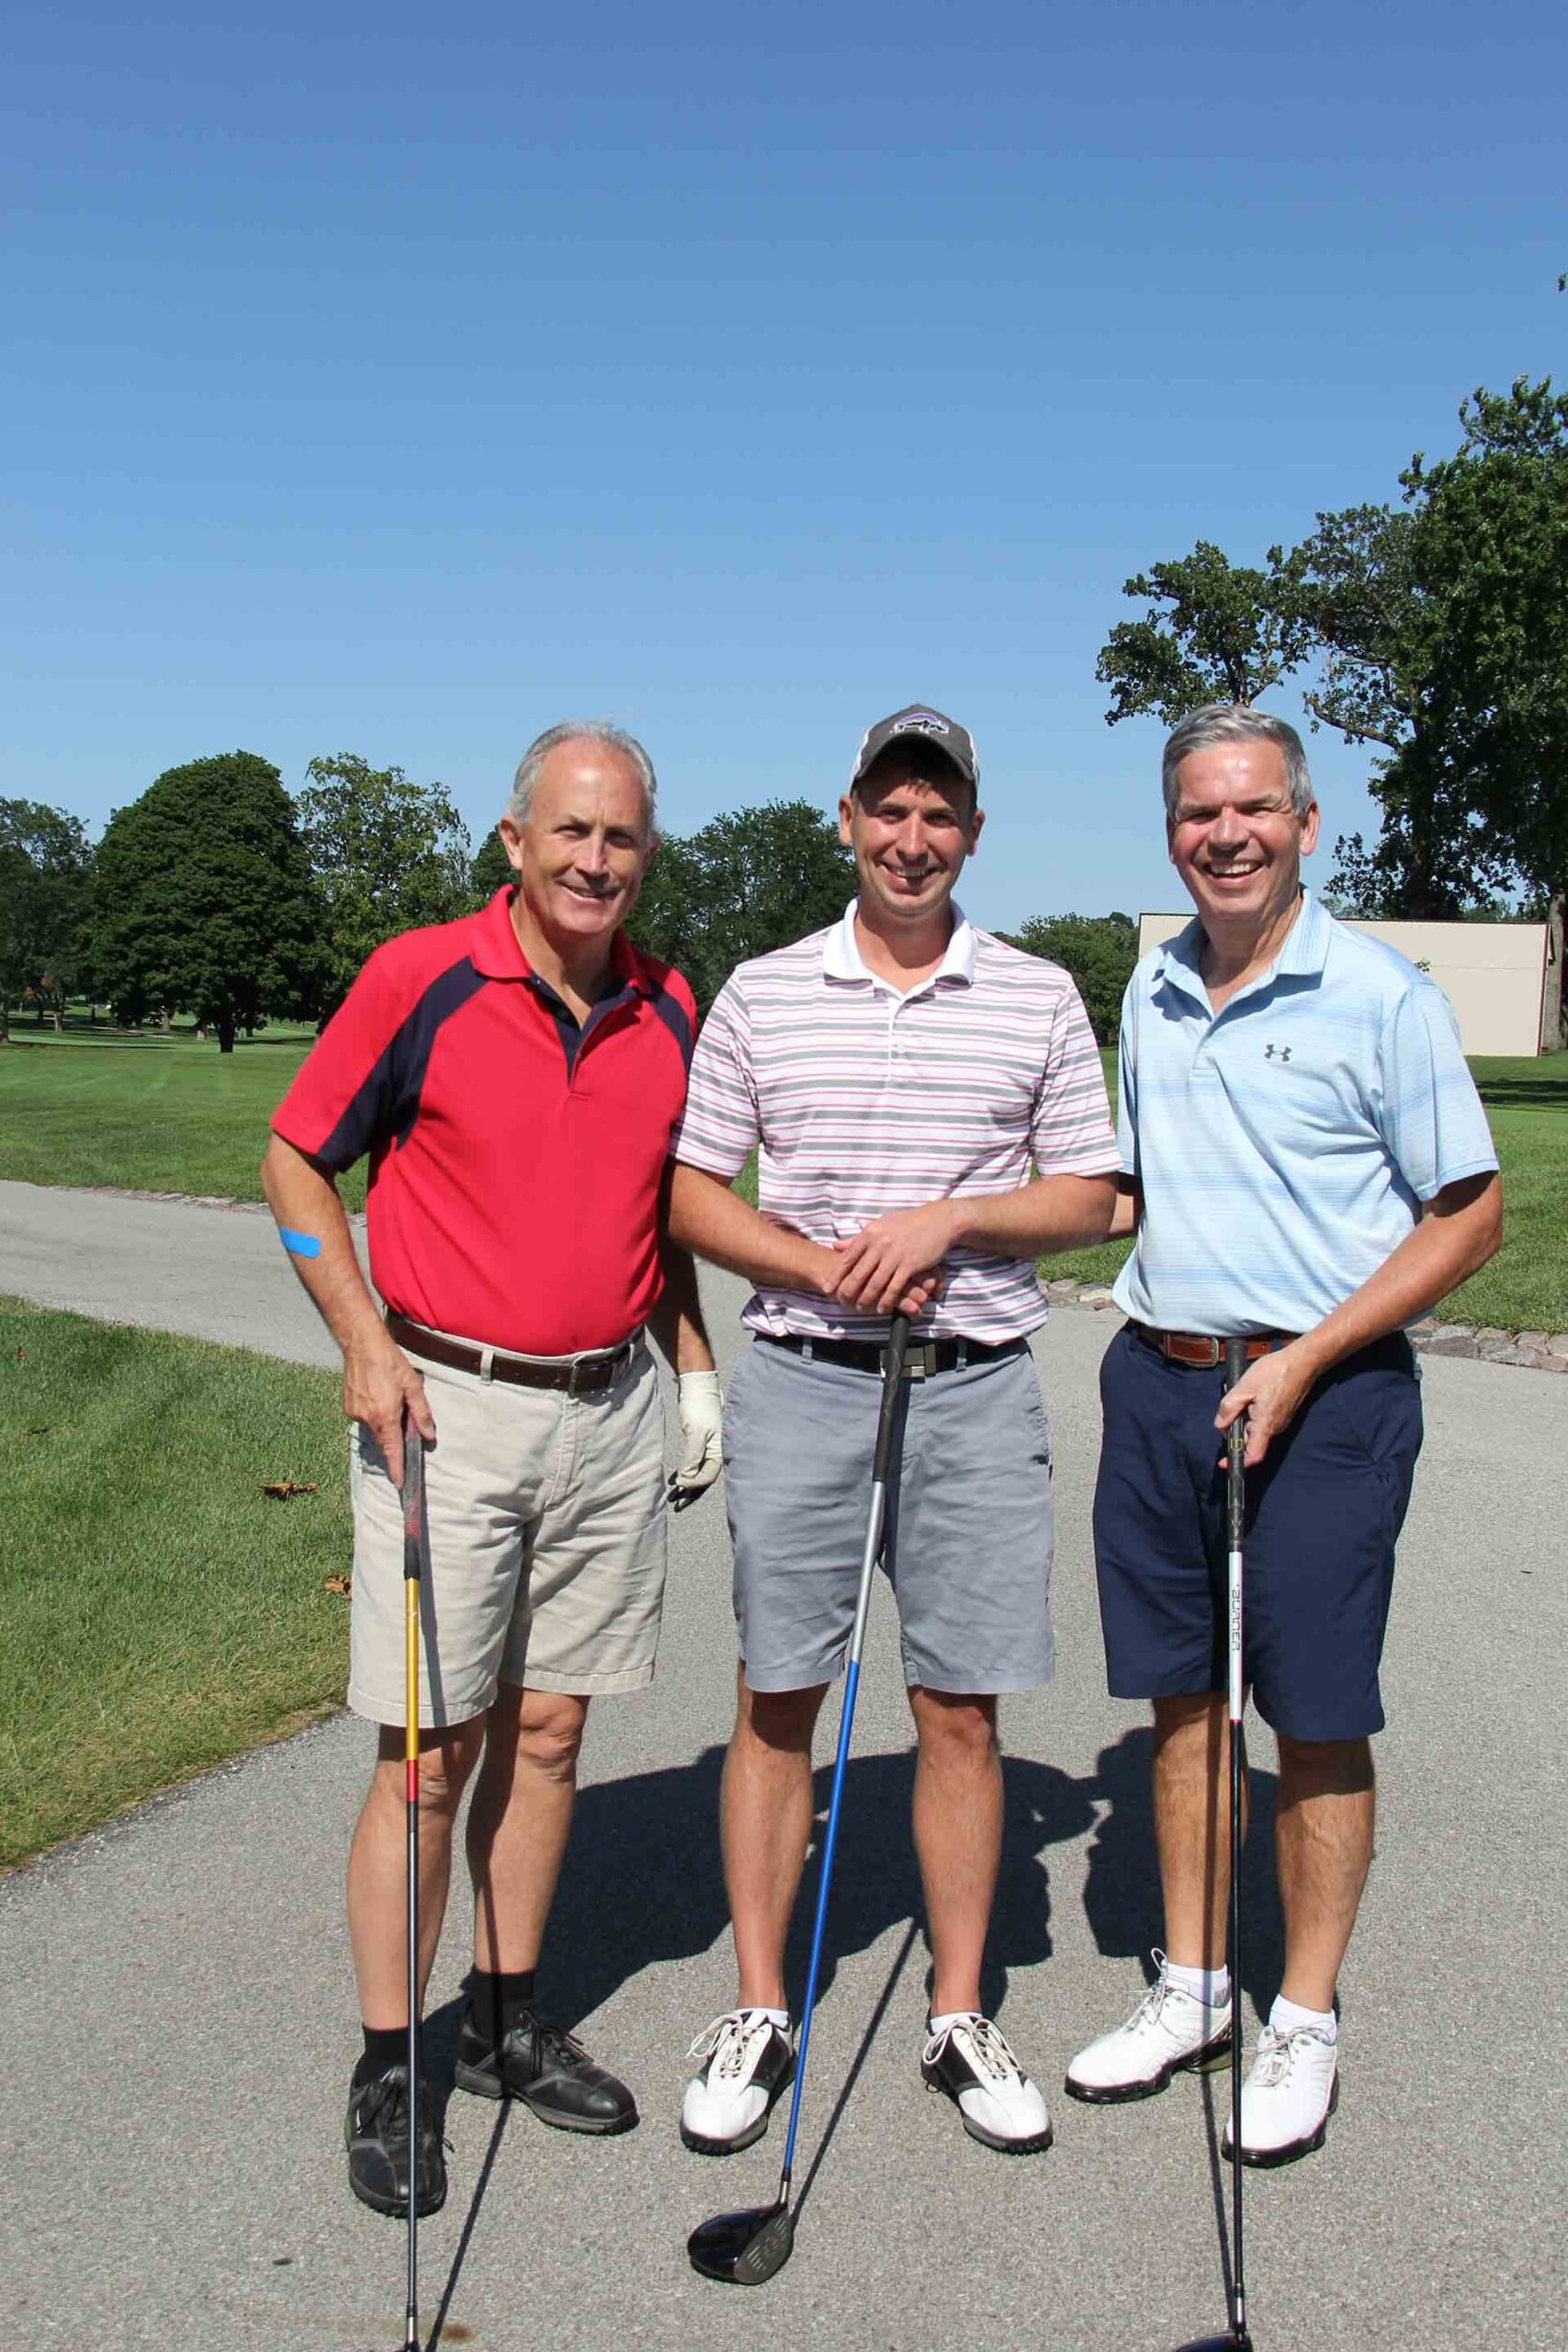 marist-law-association-golf-outing-group-of-three-golfers